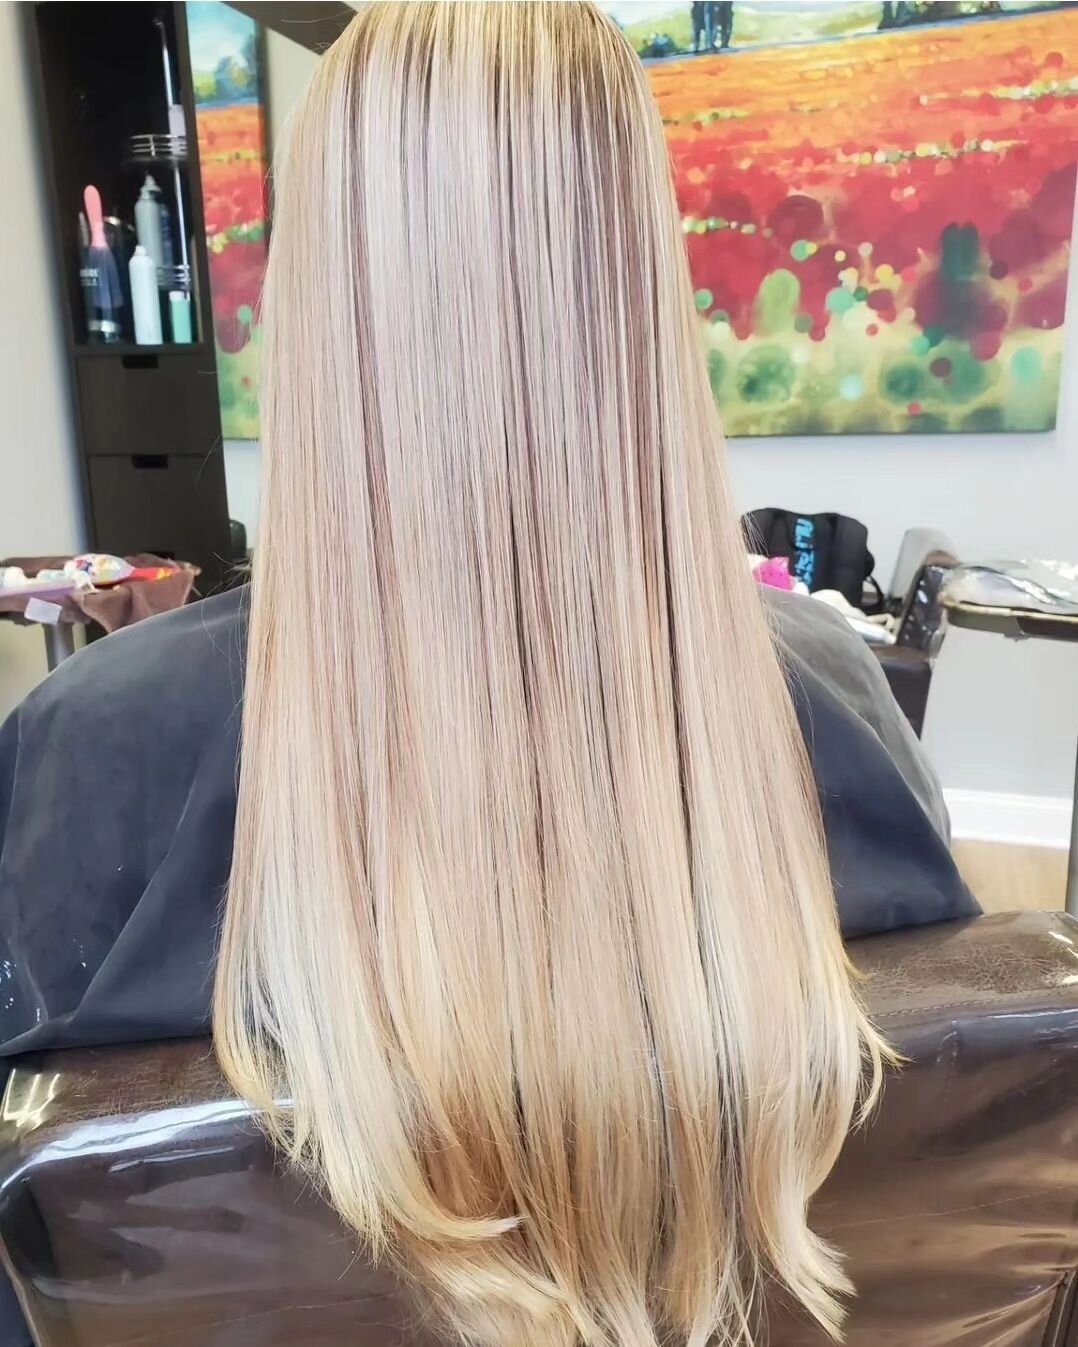 This balayage by Brandy has us thinking spring,
sunny days, and warm weather are on the way. If
you've been dreaming of brightening up your hair to
match the bright days ahead. This is your sign to do it! Balayage and long layered haircut; remarkable